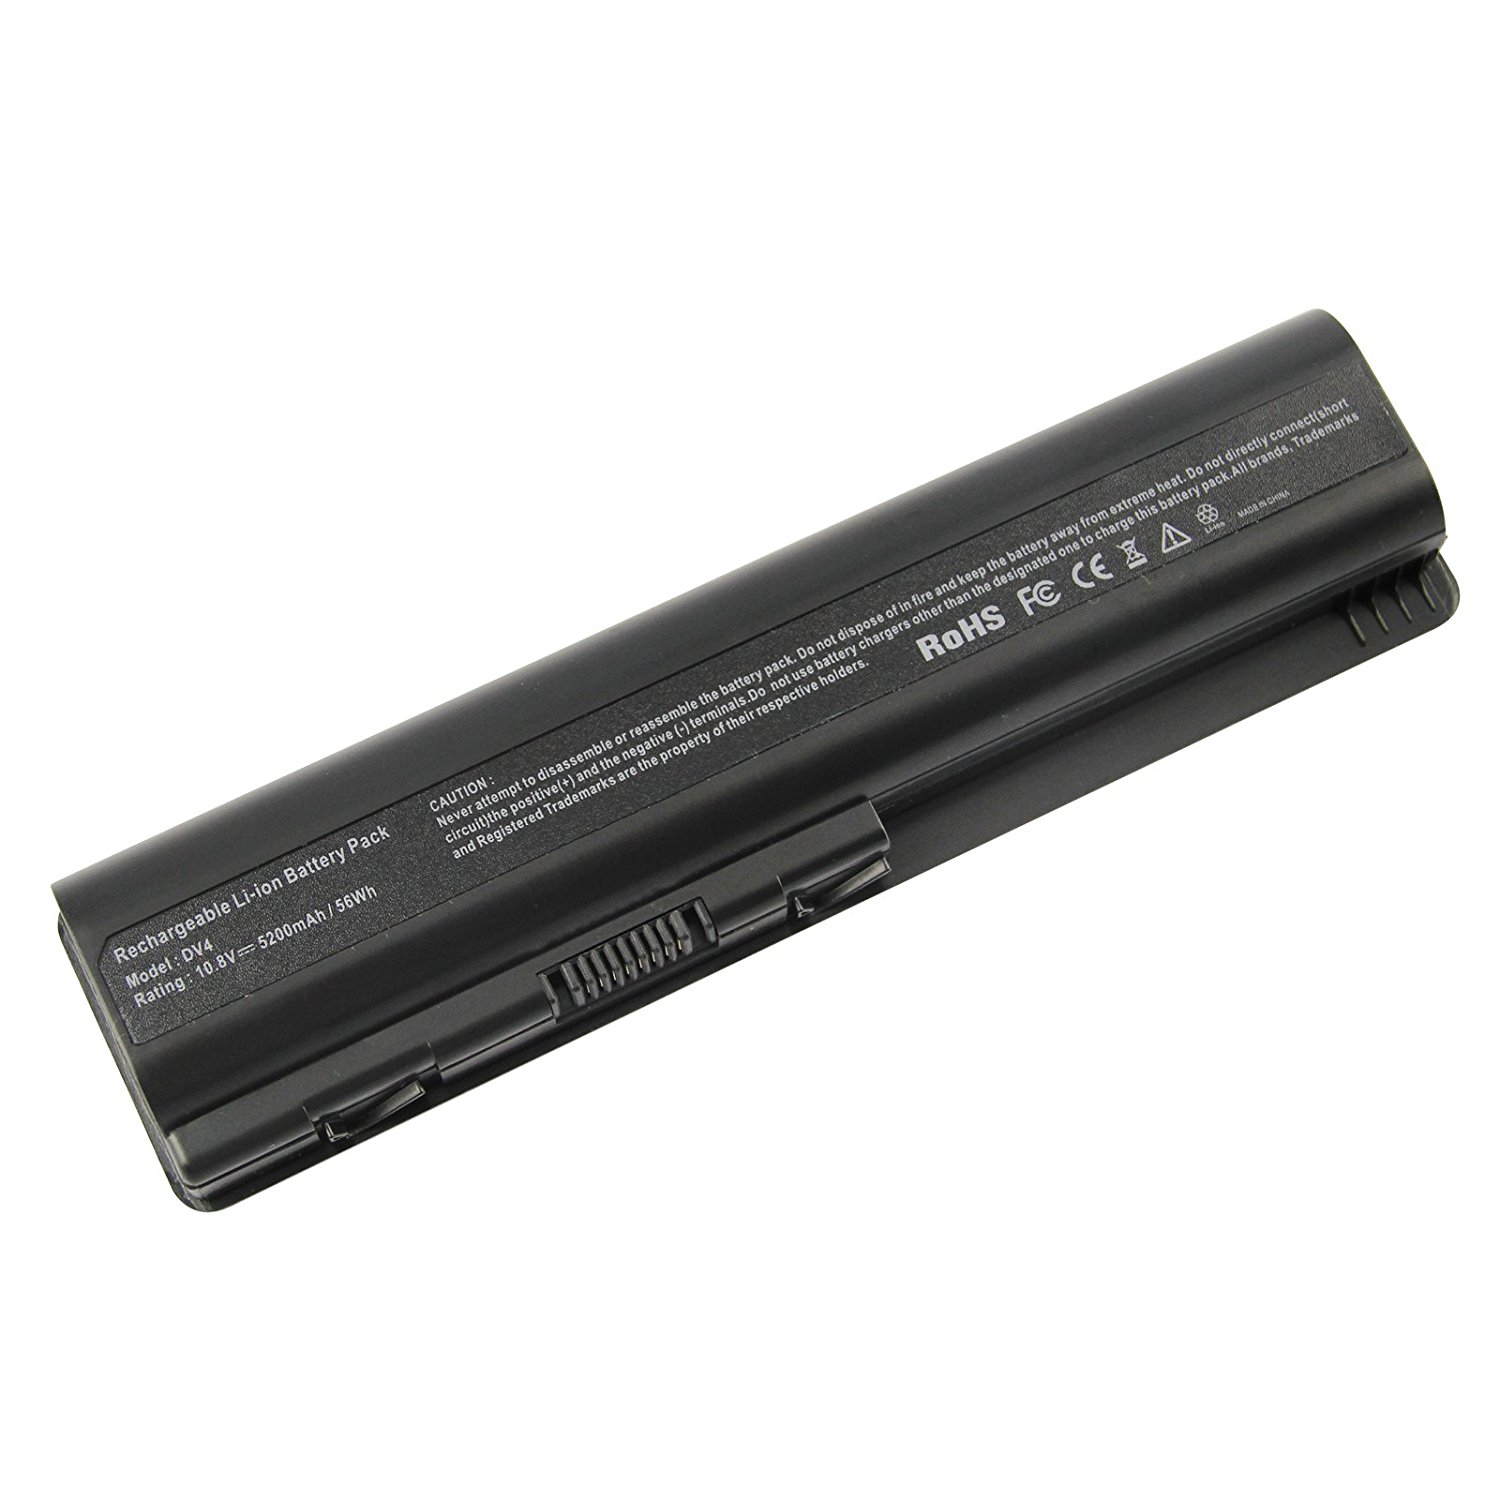 BATERRY FOR LAPTOP REPLACEMENT FOR HP EV06 10.8V (4400mAH)